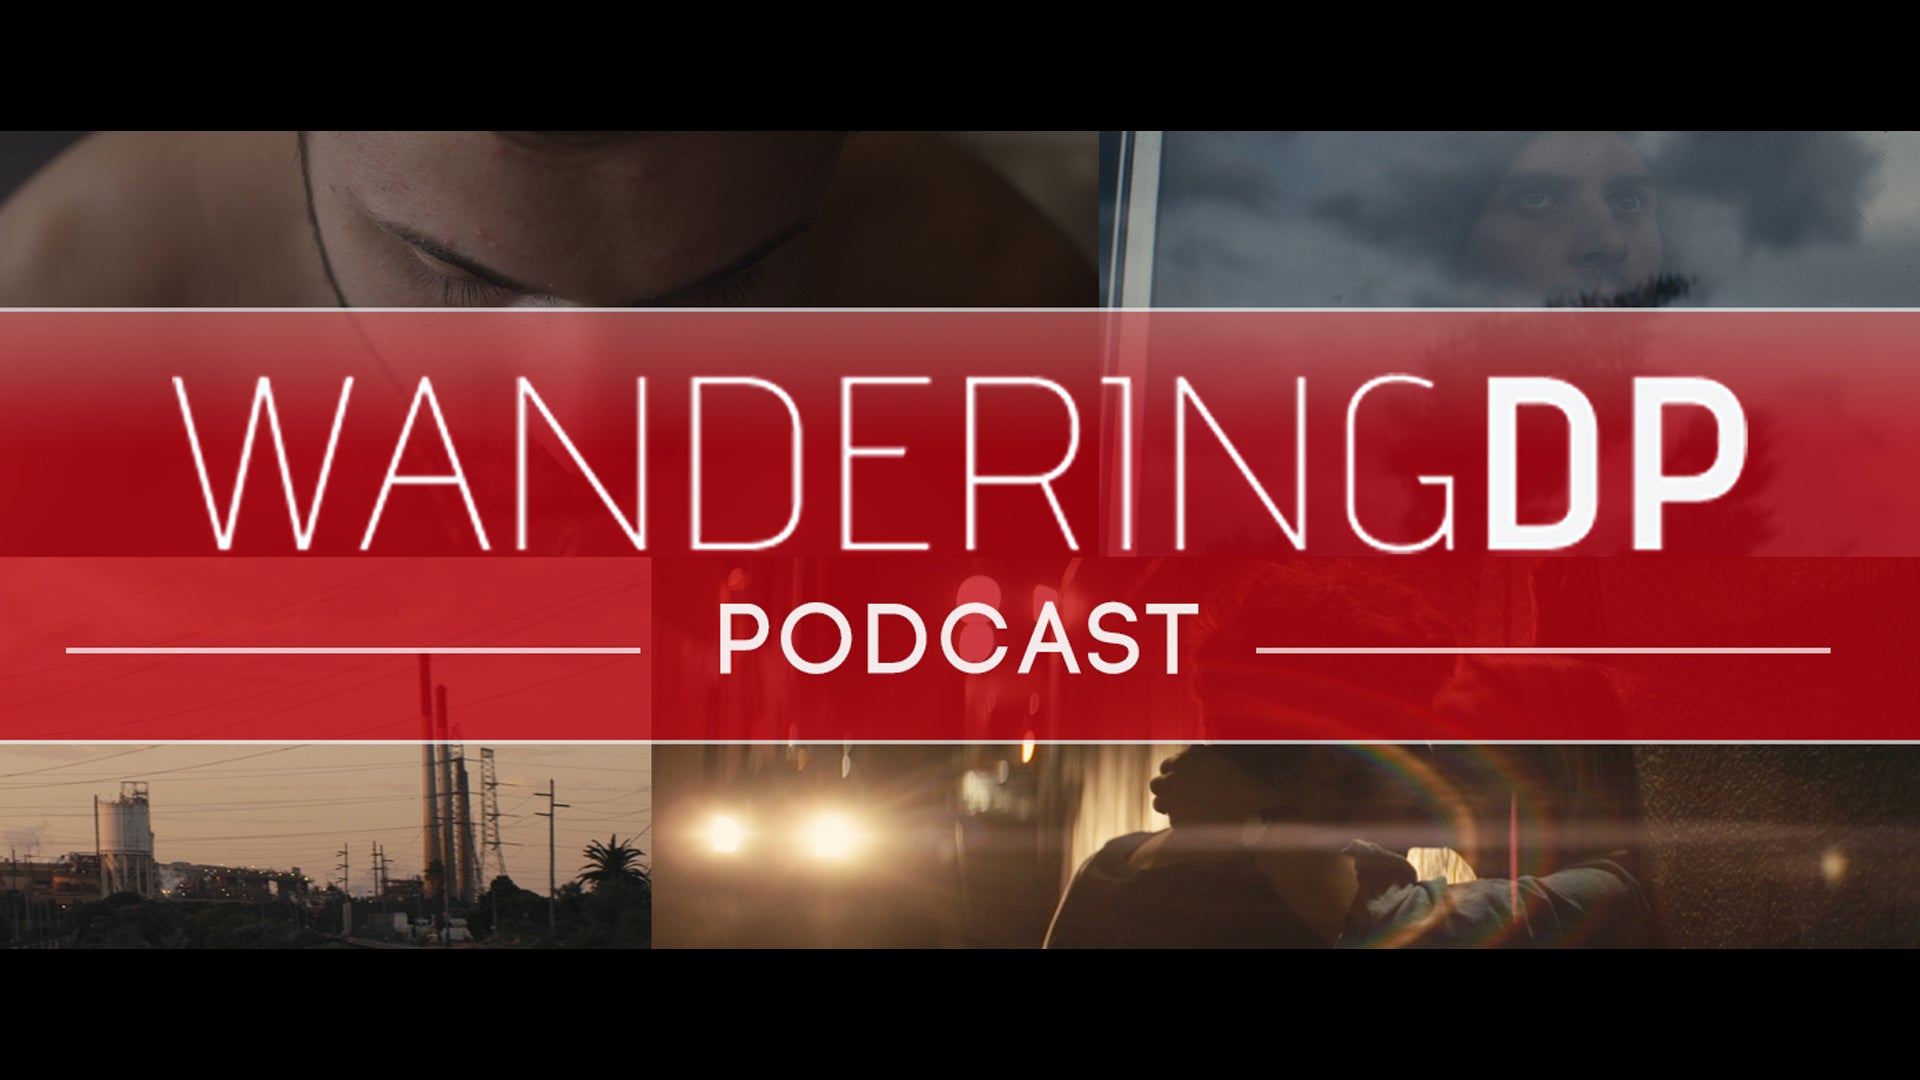 The Wandering DP Podcast: Episodes #21 - #30